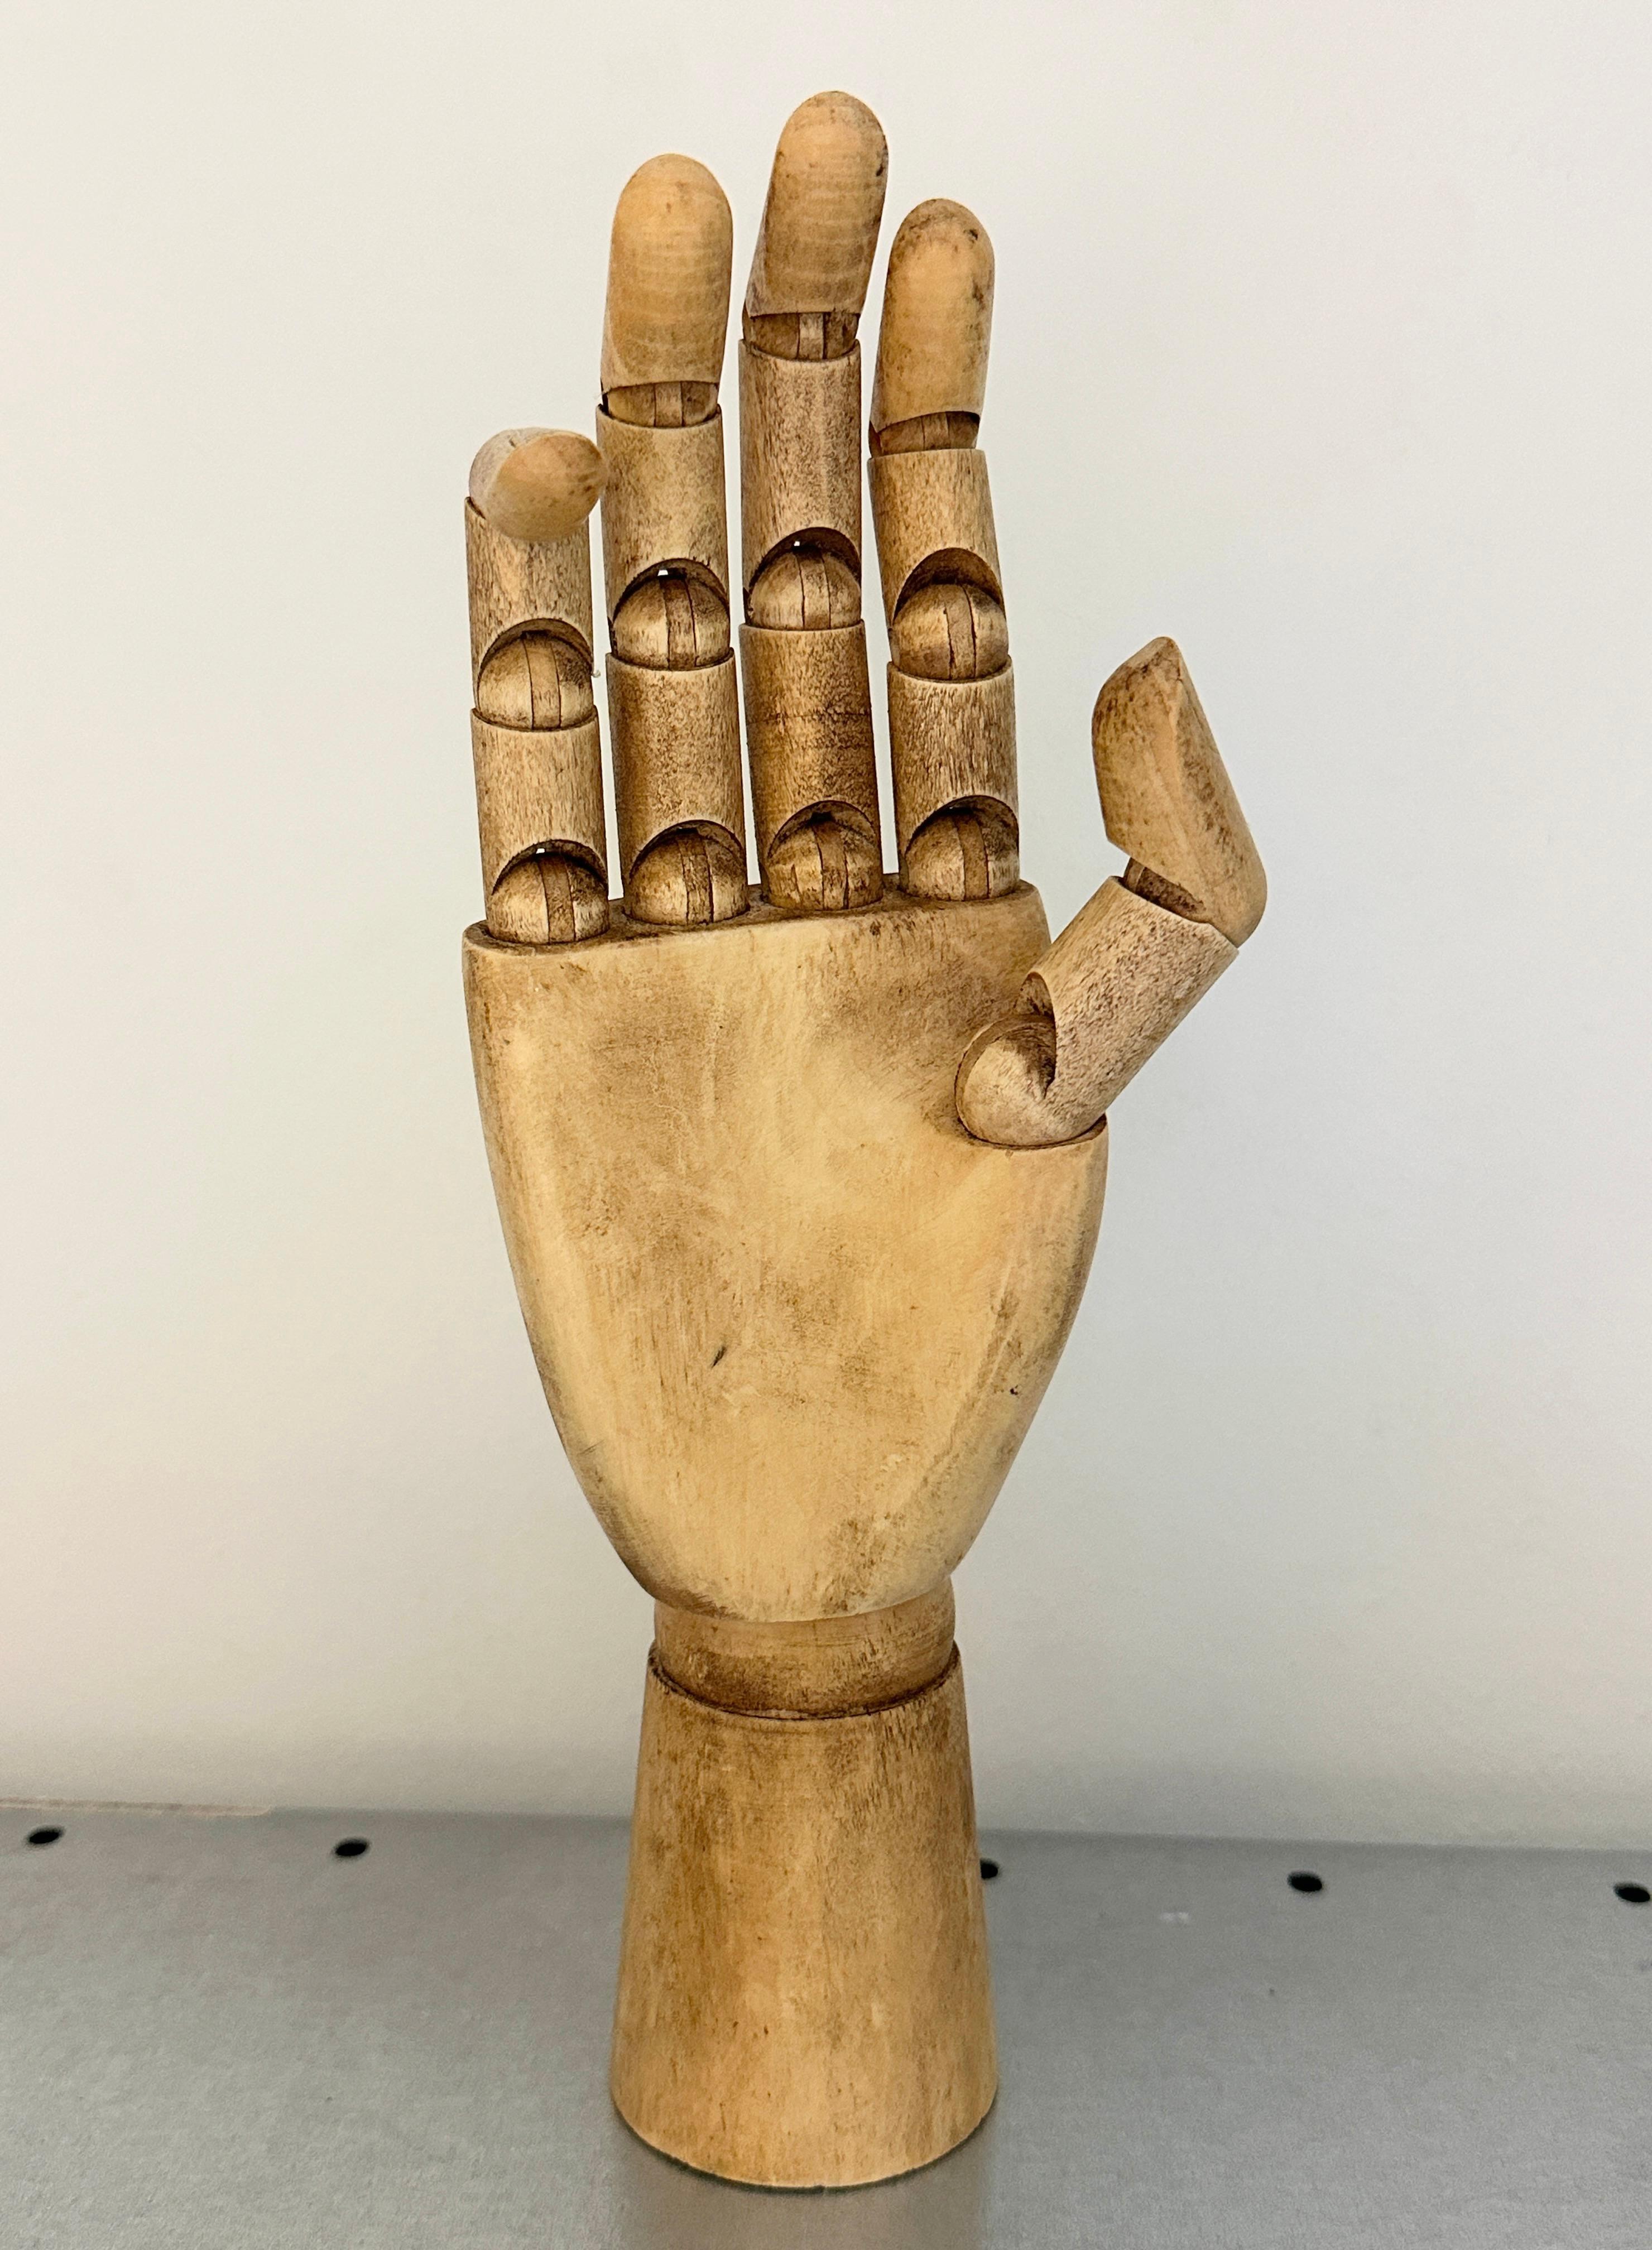 A handmade wooden Artist mannequin hand model - all joints move as they should. Found on an Estate sale in Vienna, Austria.
Shows some minor wear - but looks beautiful on display! Some scratches and a nice patina due to the age.